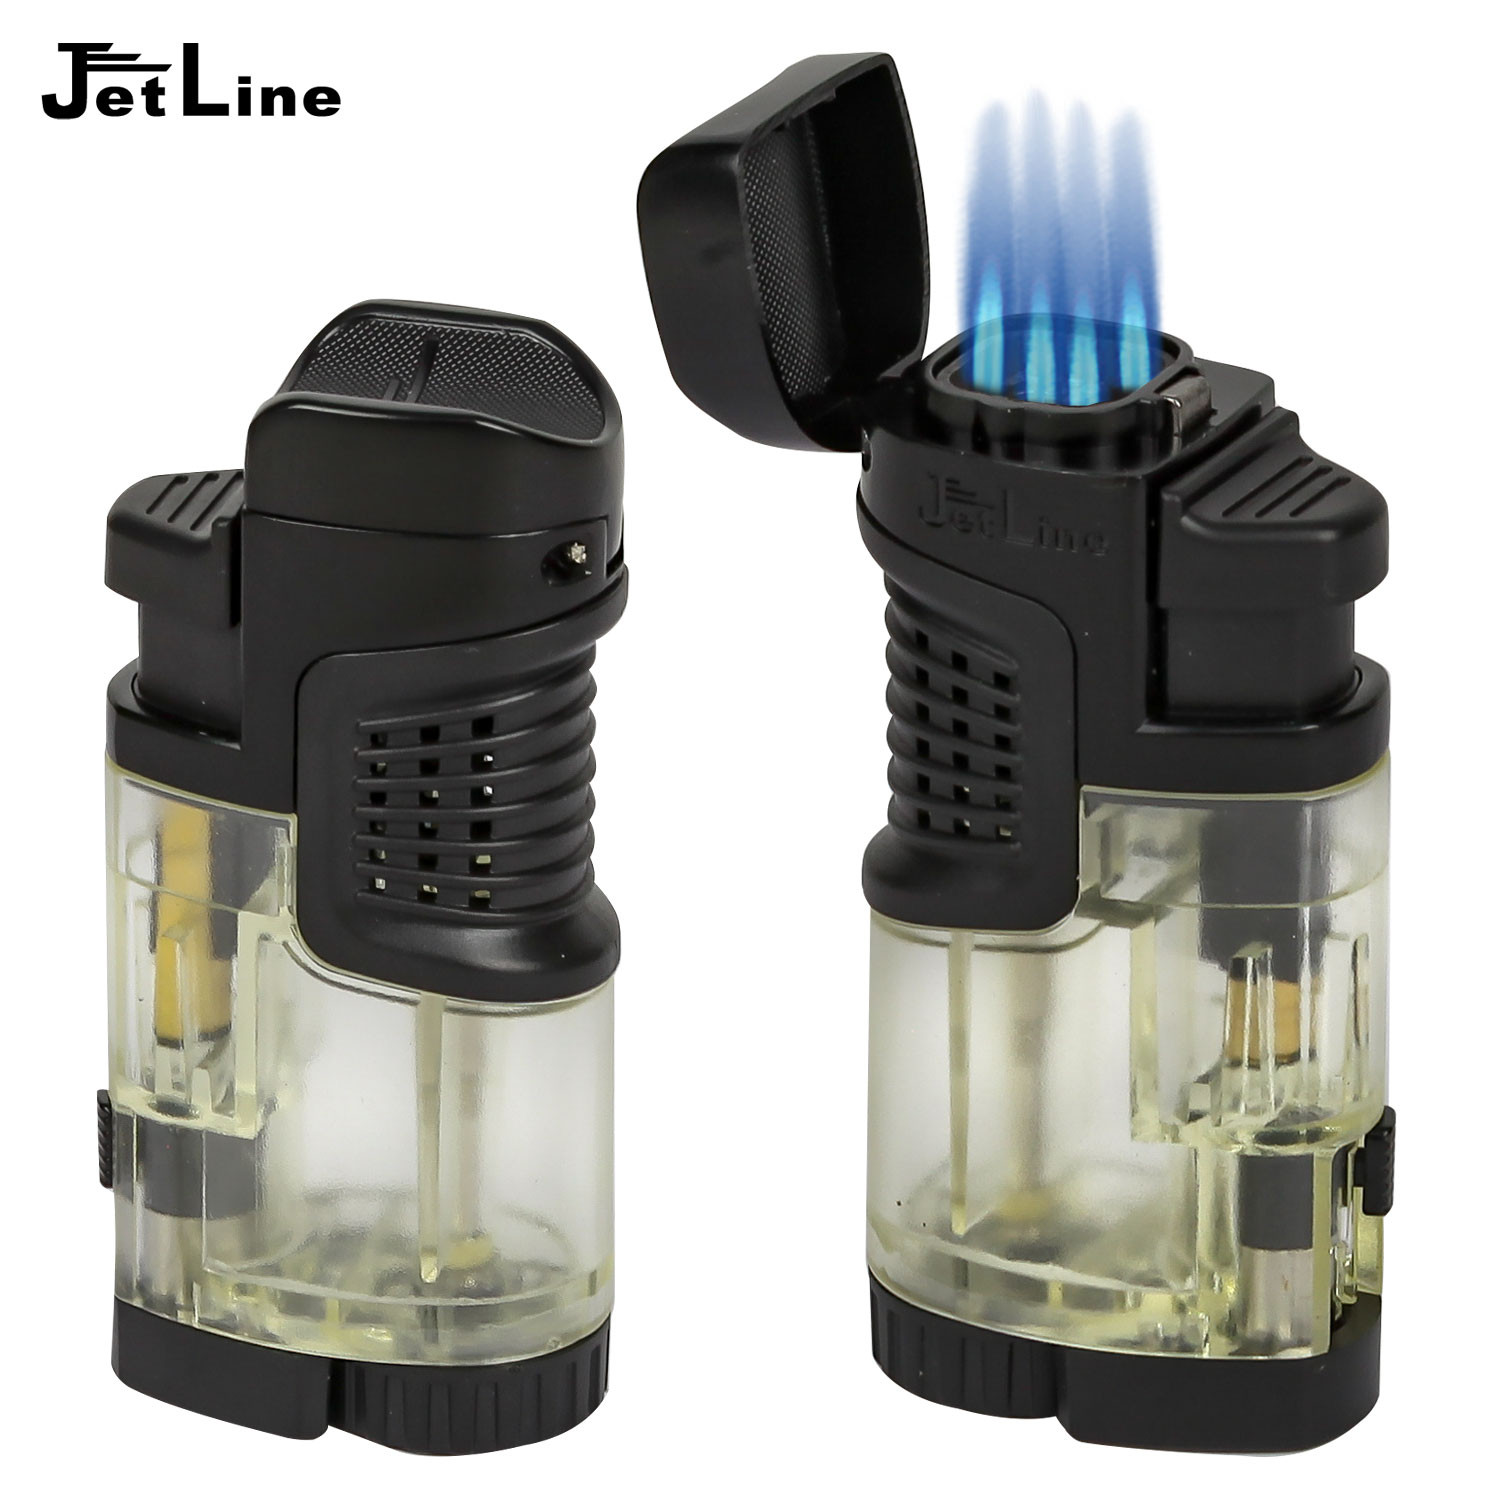 JetLine Fatboy Quad-Flame Lighter - Clear - More Stuff | Field Supply